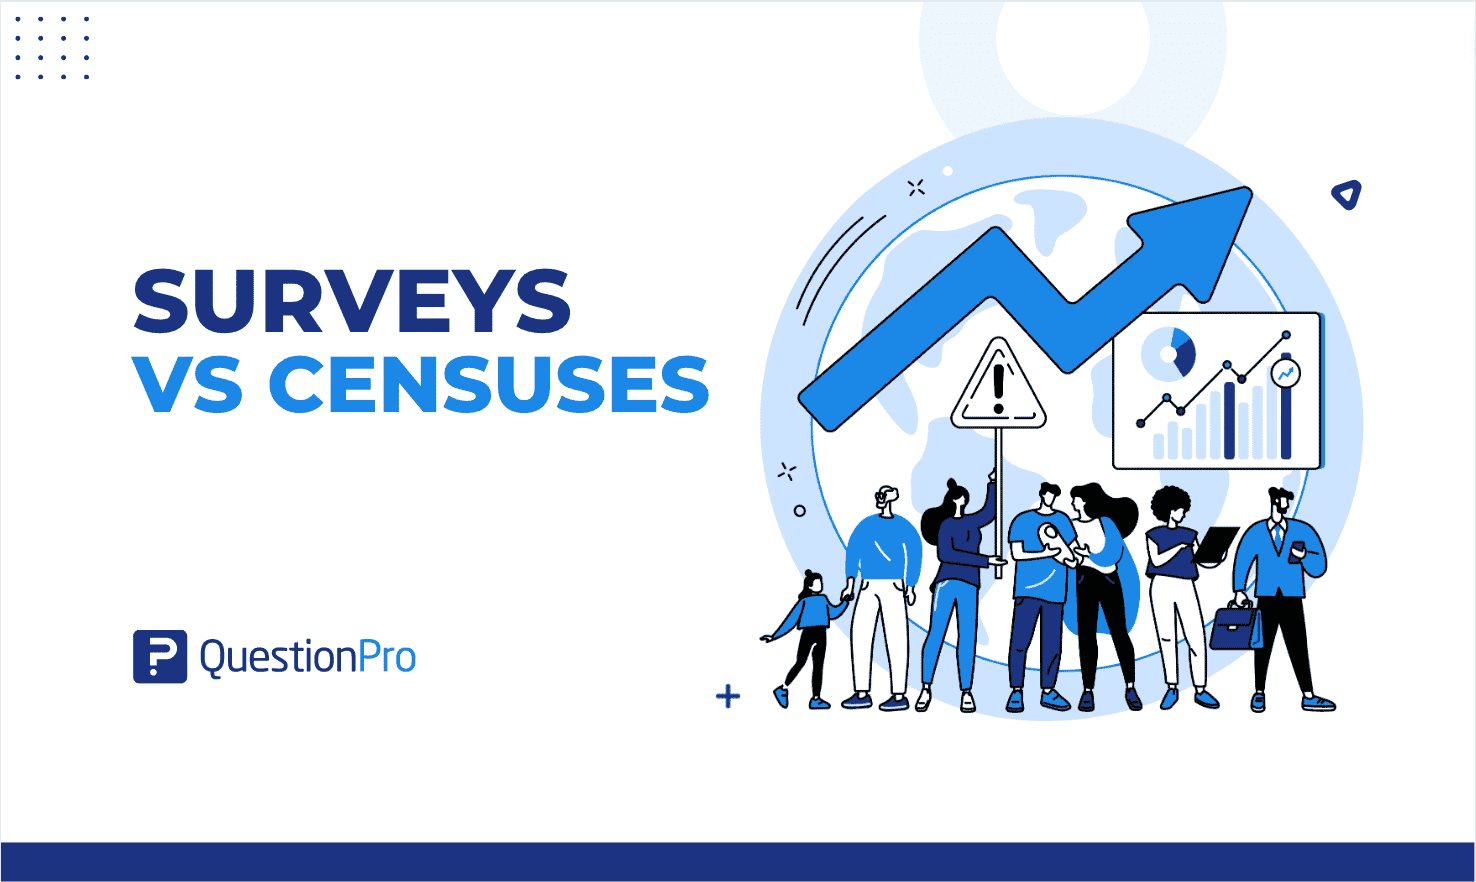 The difference between surveys vs censuses is that one collects data from a population, and the other collects information from a portion.